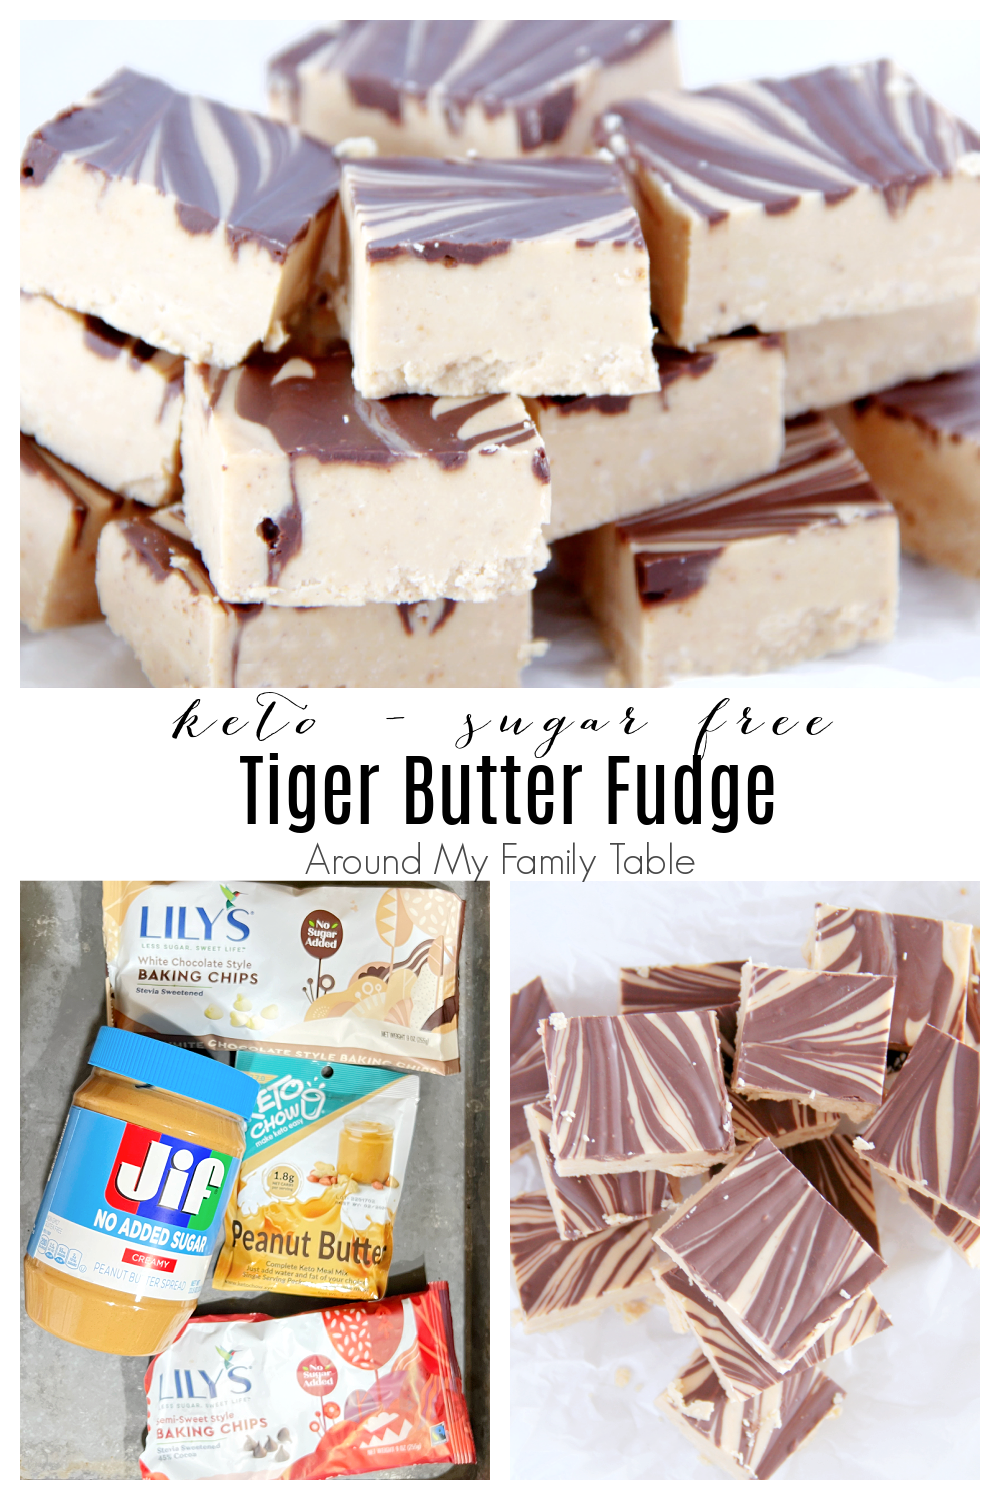 My keto friendly Tiger Butter Fudge is a gourmet, simple fudge recipe, and all you need are 4 ingredients to make it. This addictive keto fudge has the perfect blend of peanut butter and chocolate. And it's sugar free! via @slingmama